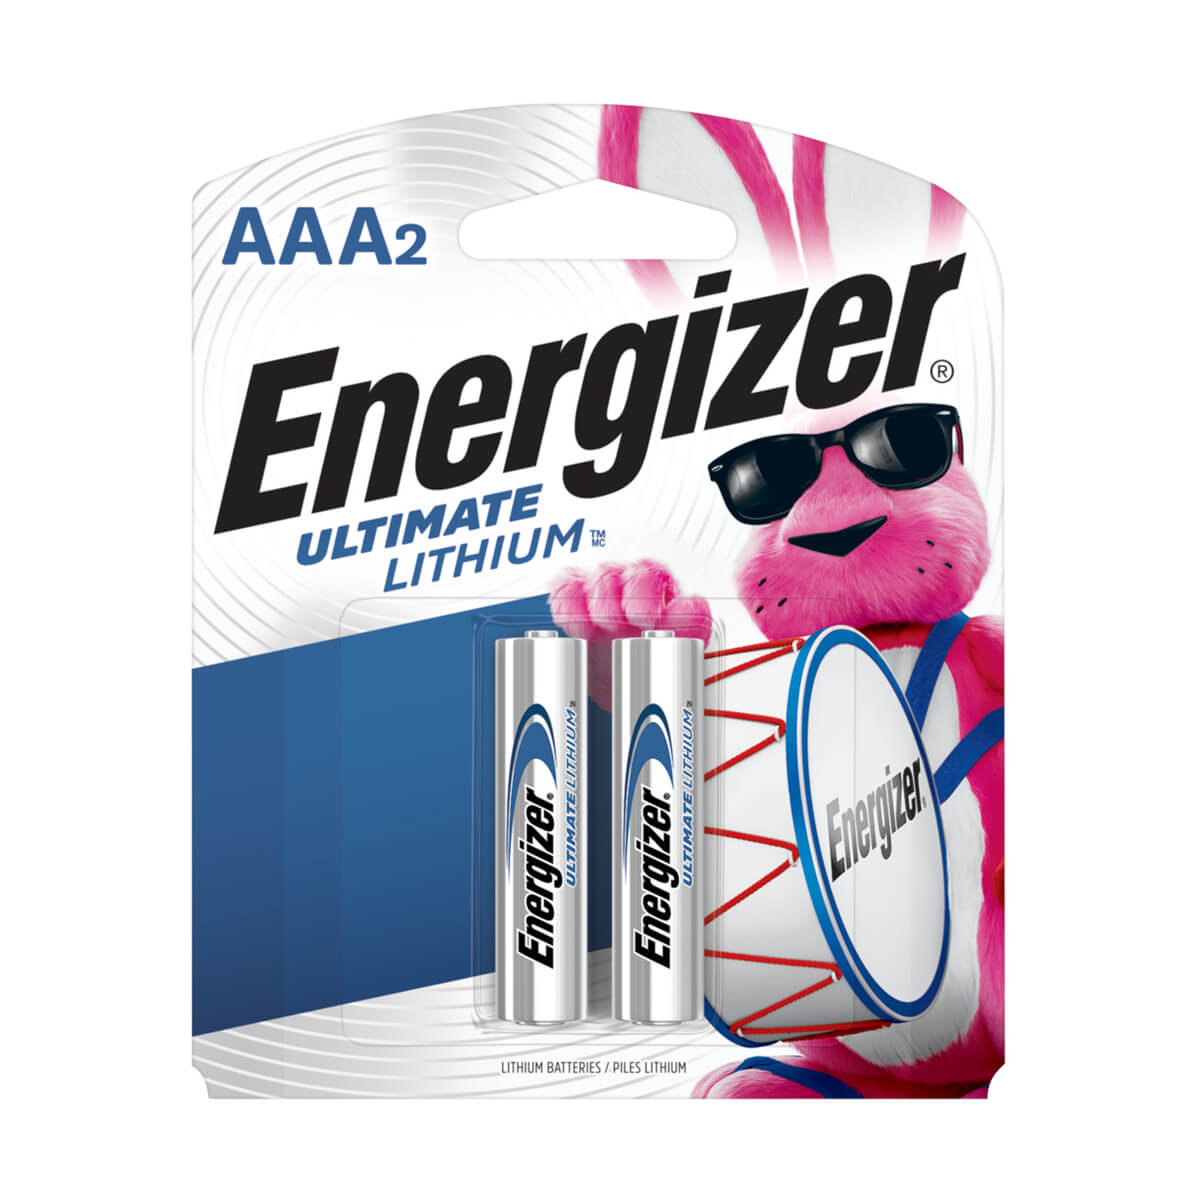 Energizer® Lithium AAA Batteries - 2 Pack